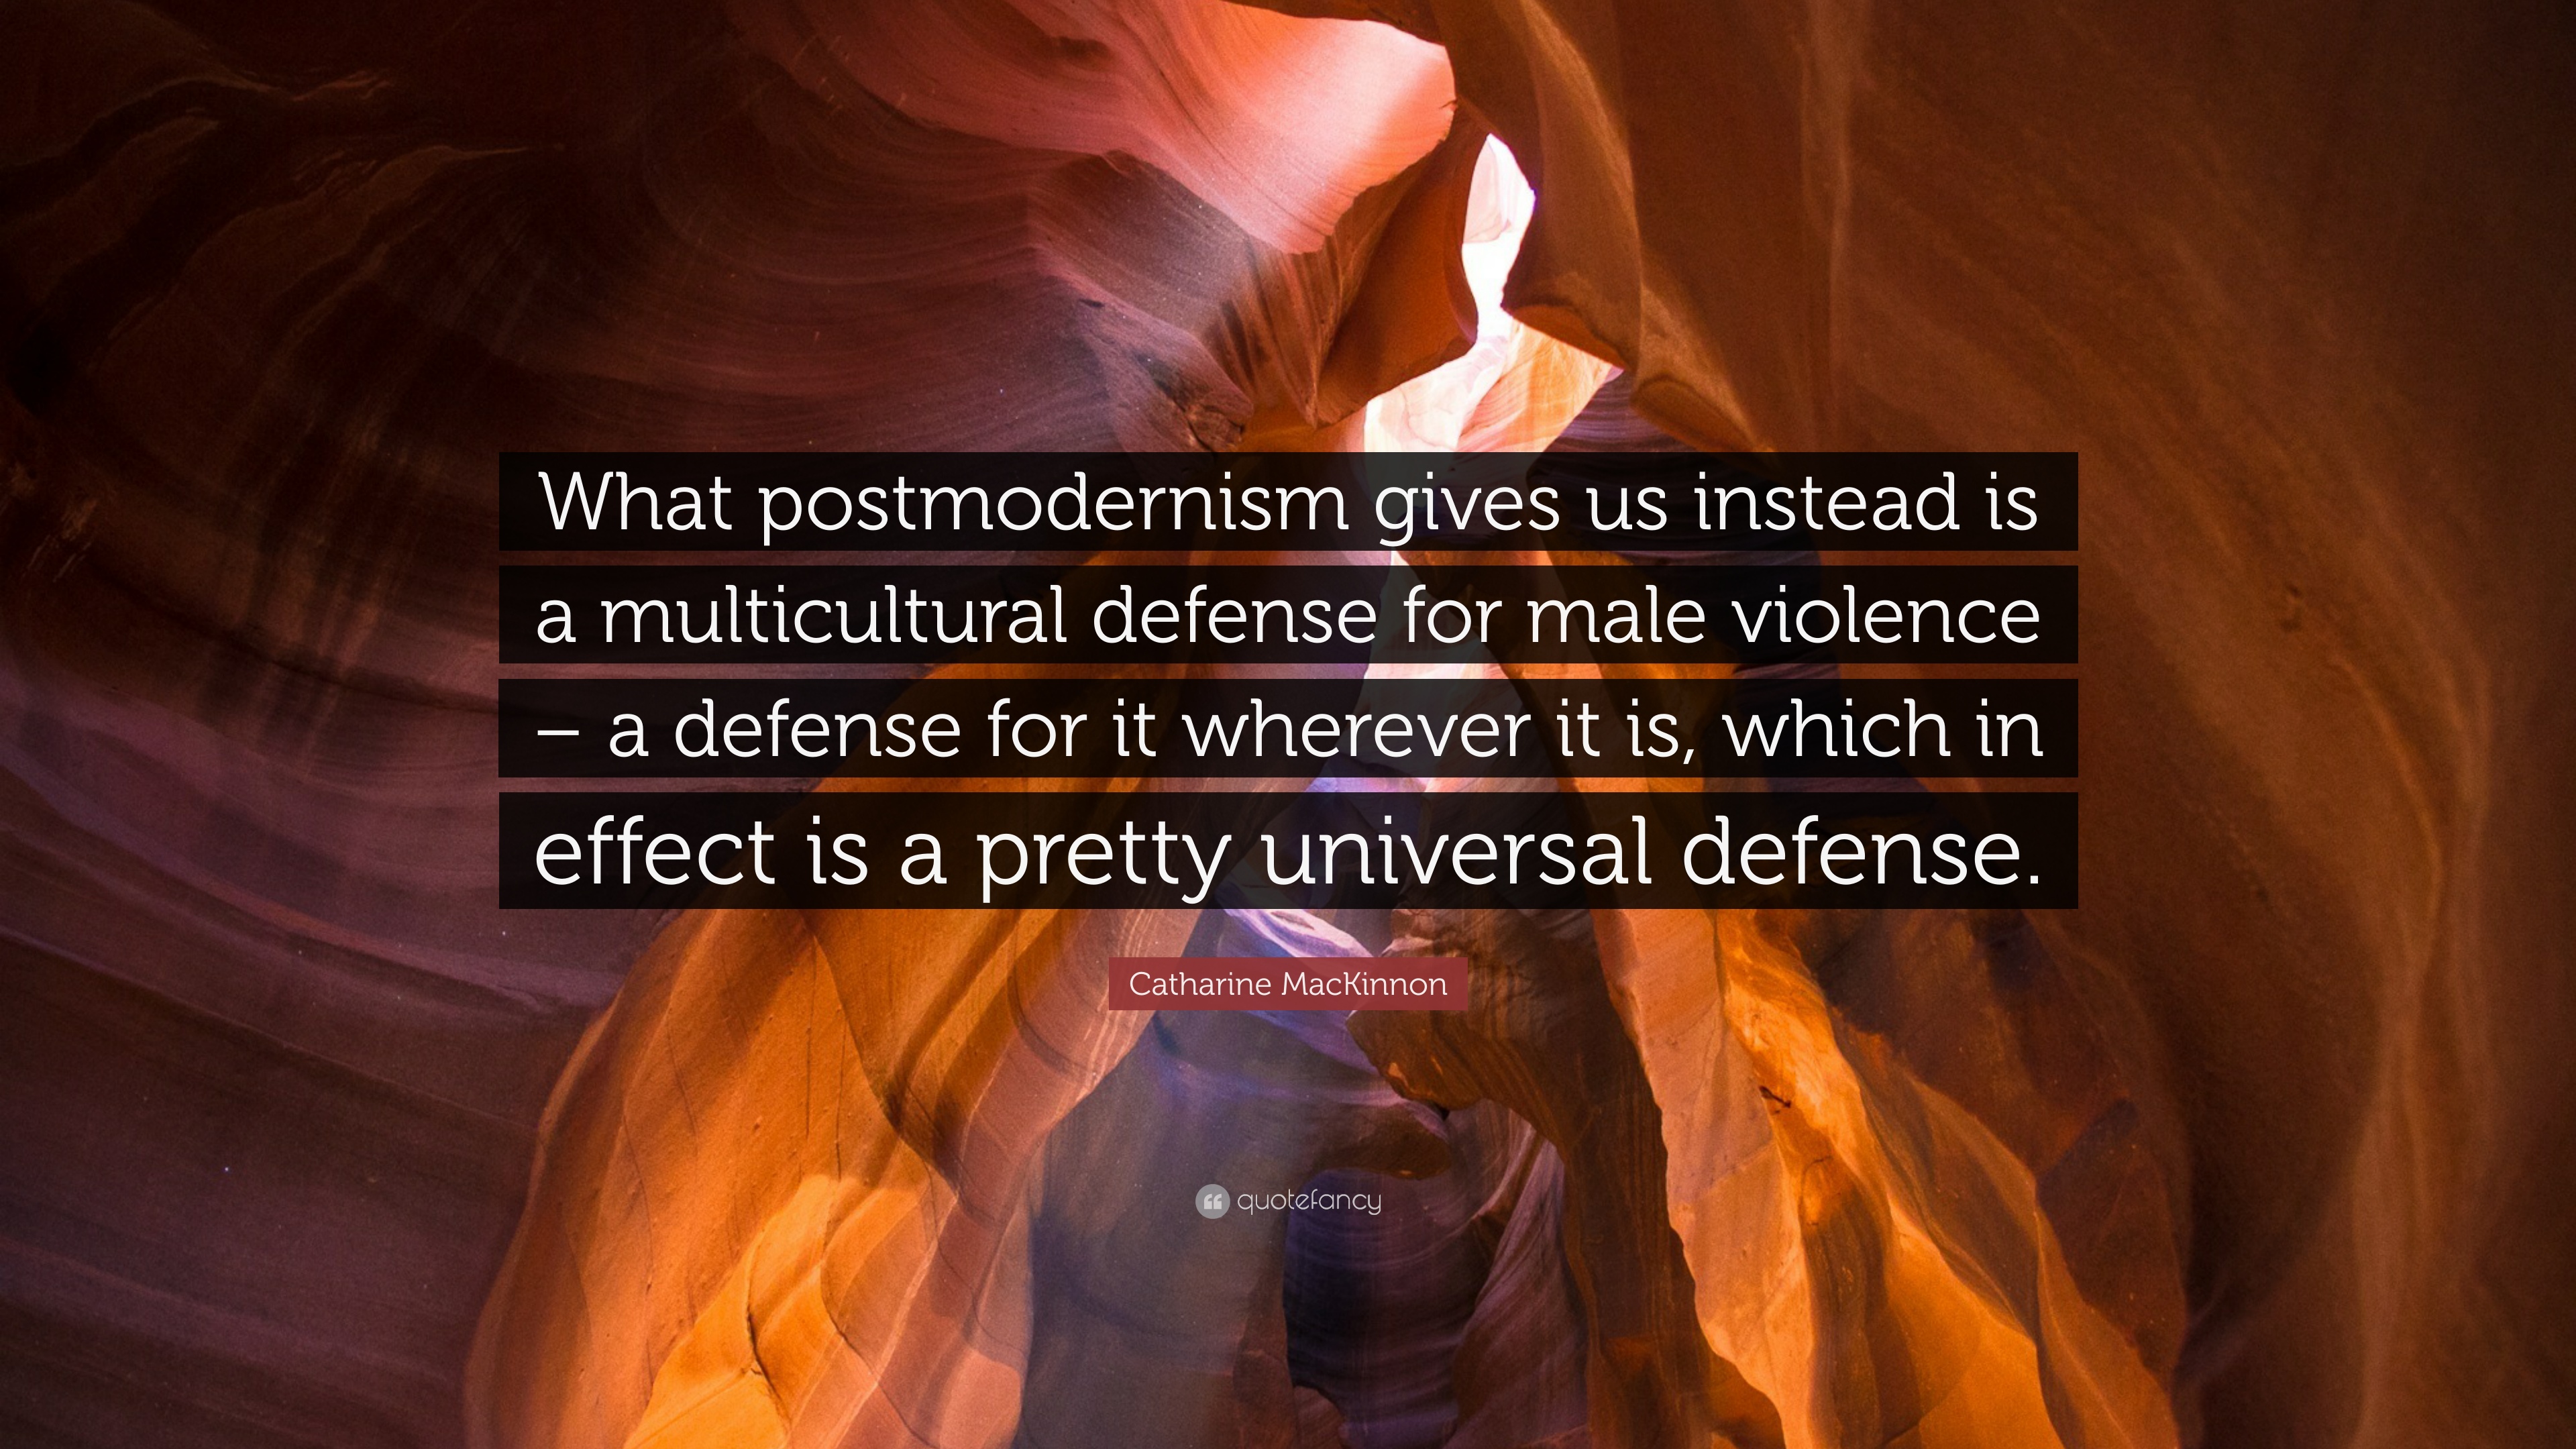 Catharine MacKinnon Quote: “What postmodernism gives us